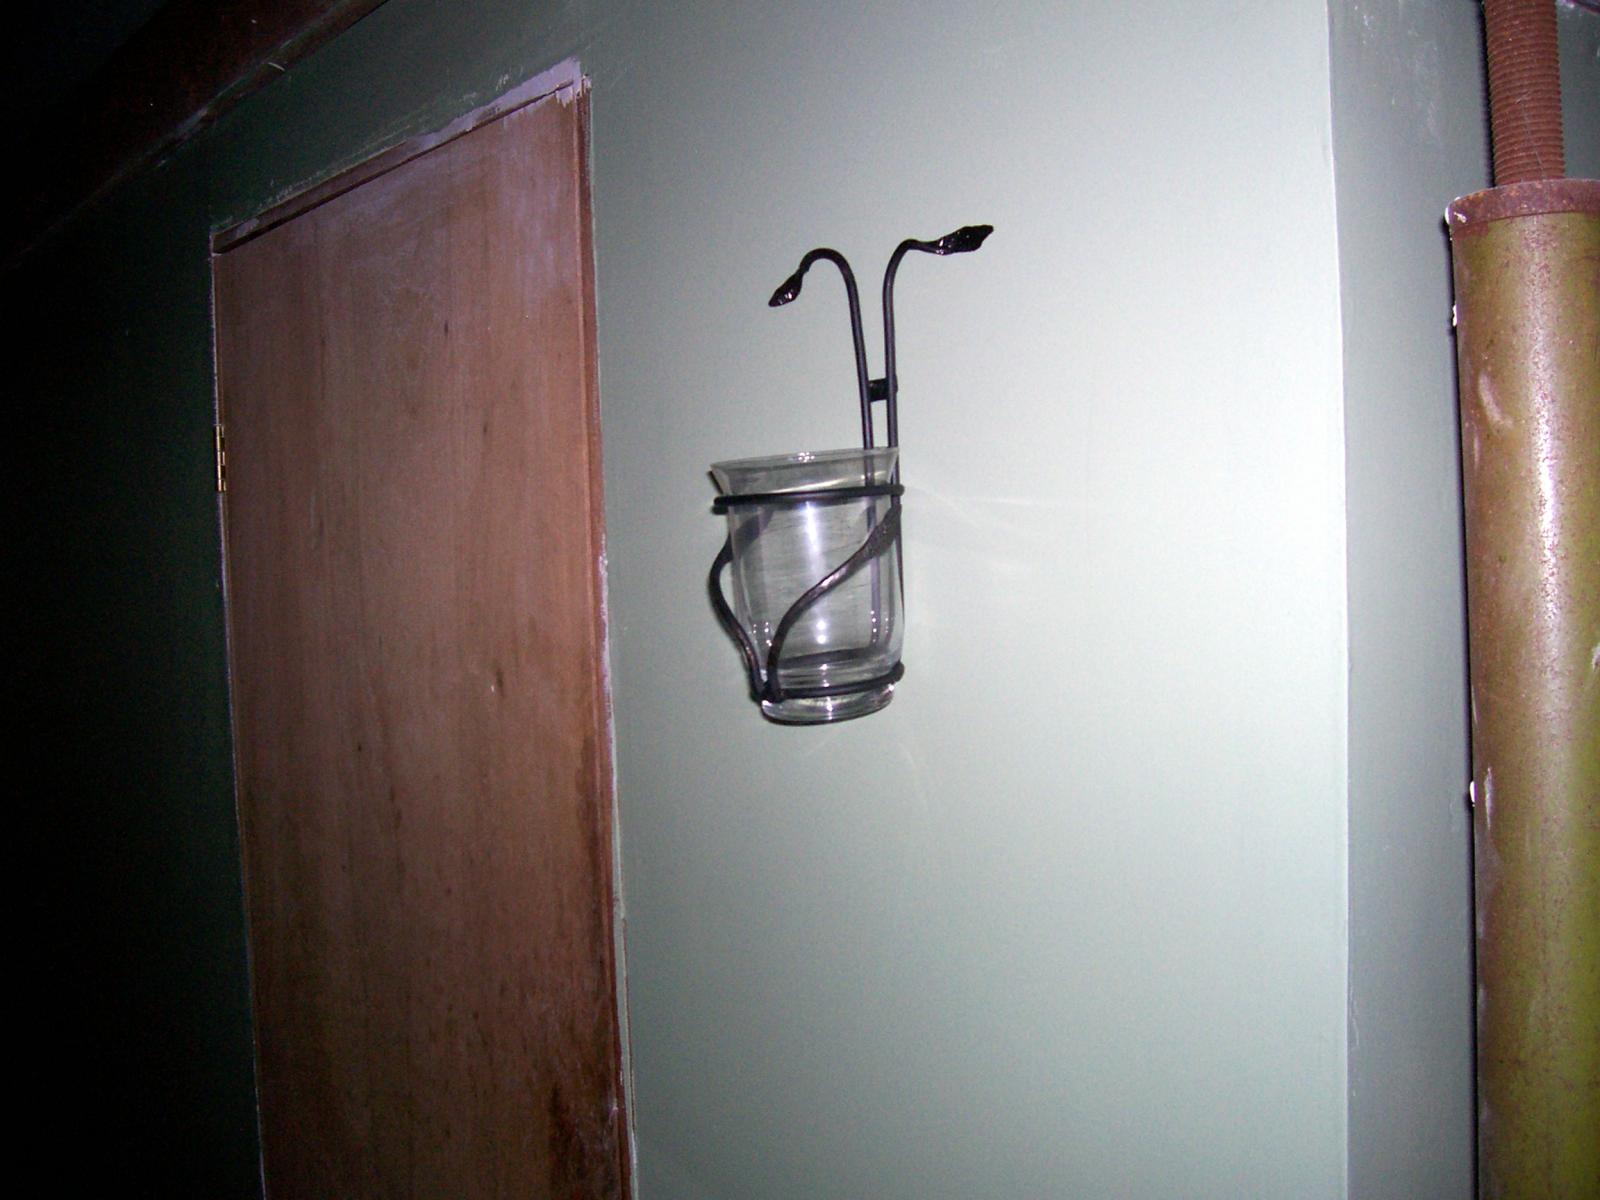 Candle wall sconce